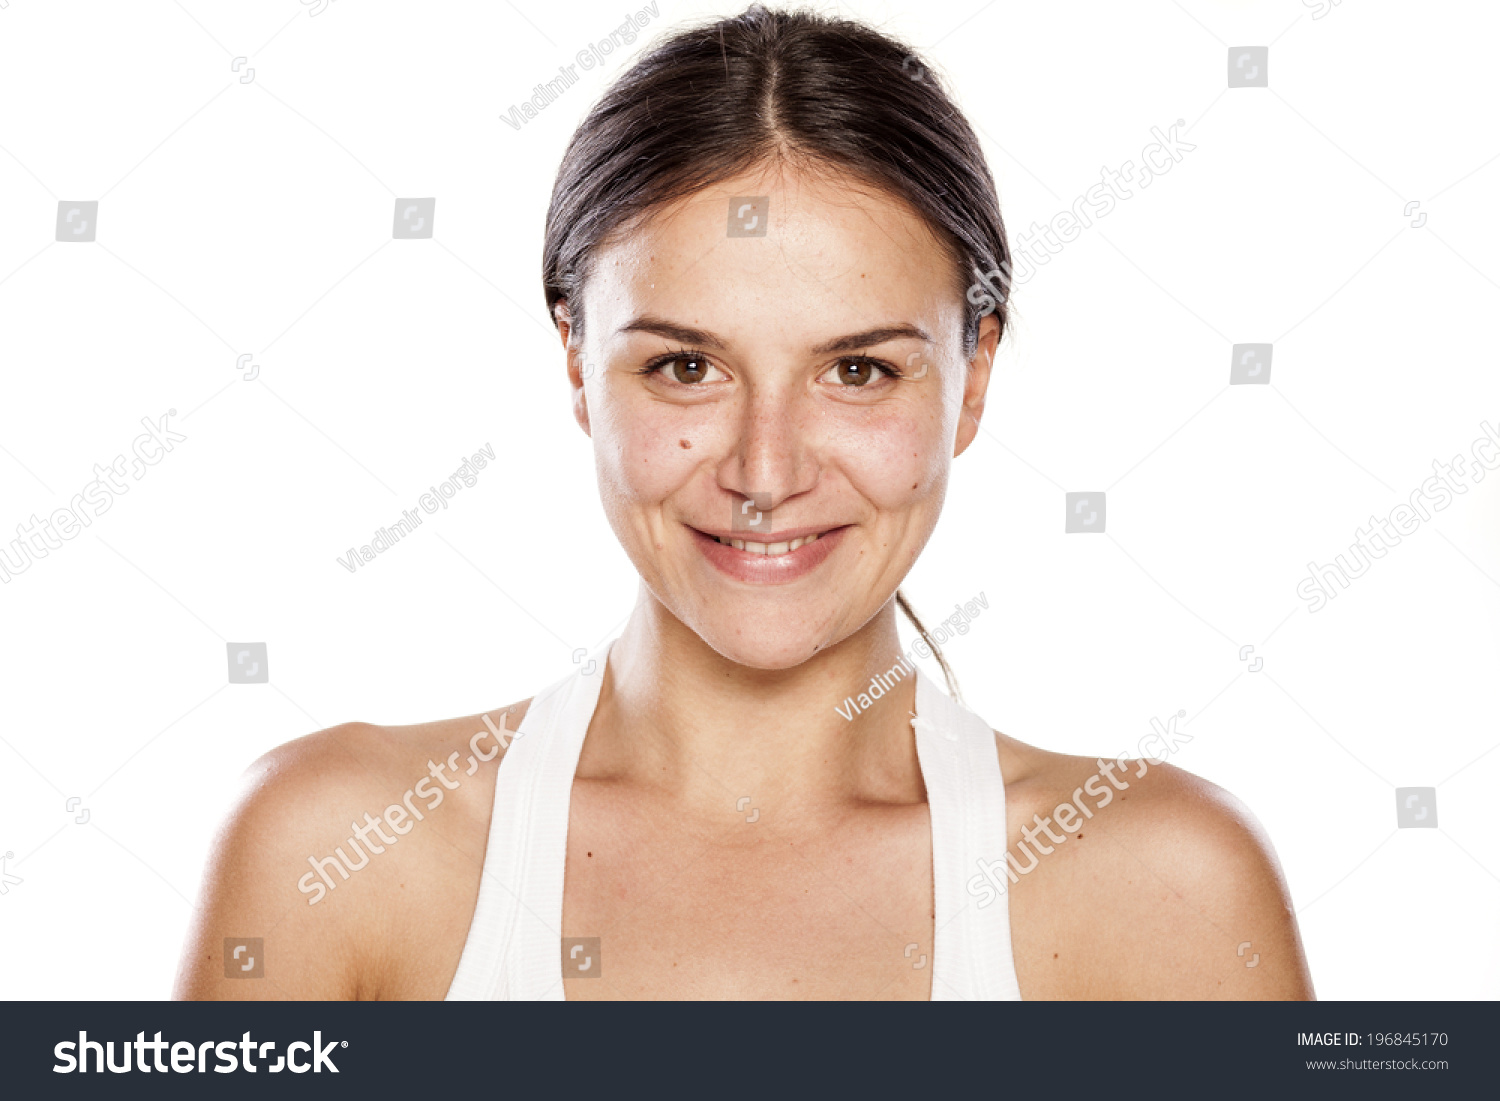 smiling young woman without make-up #196845170